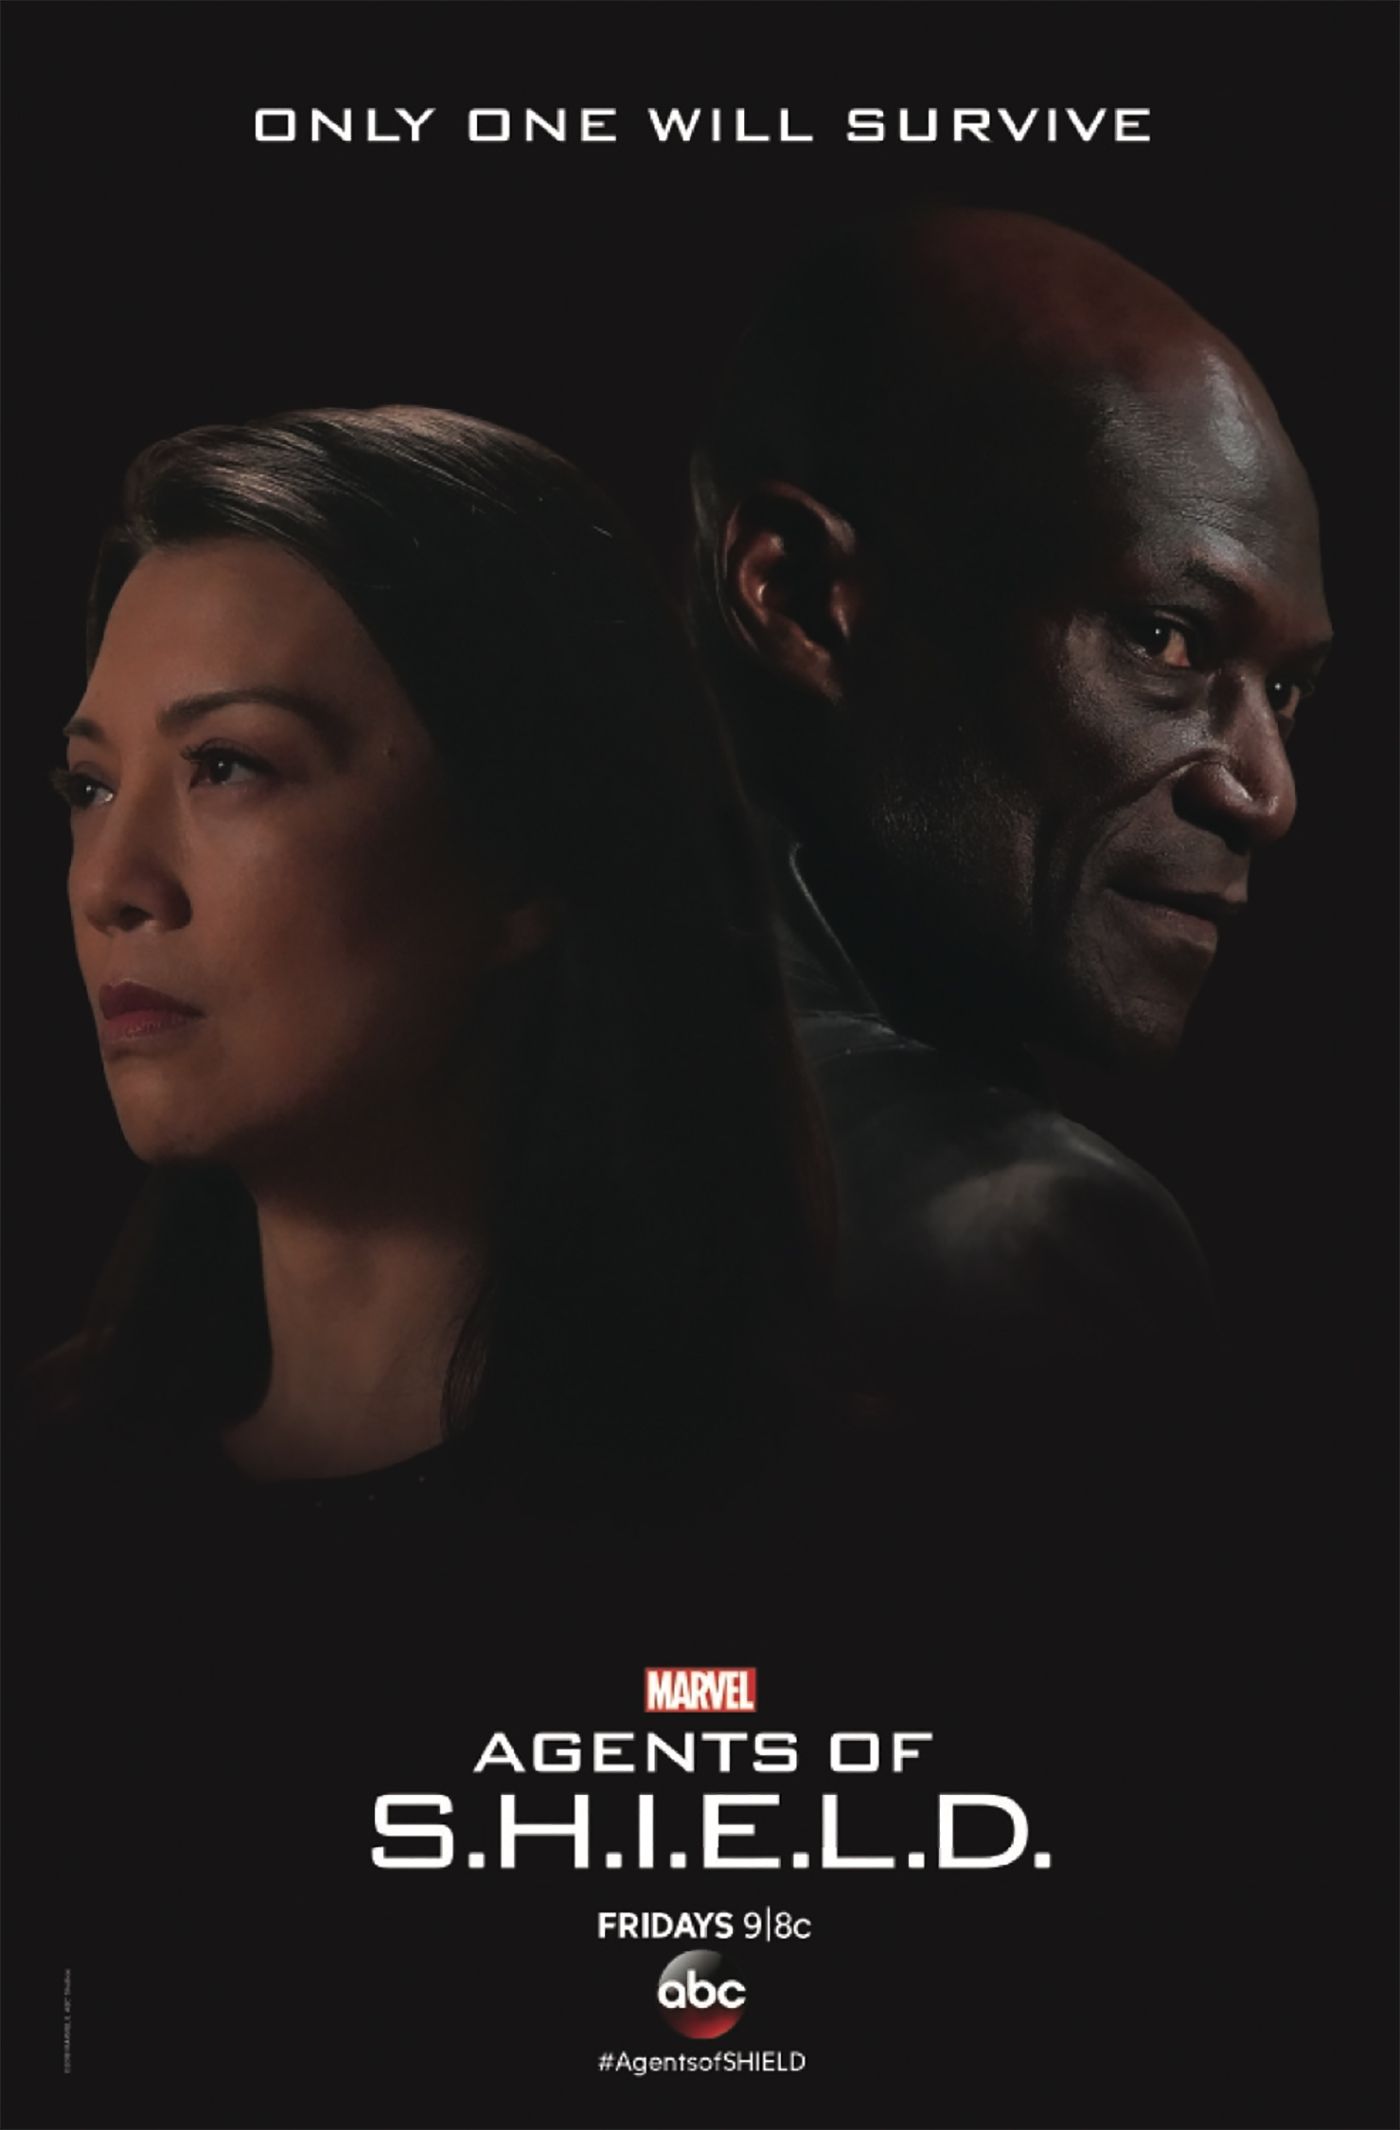 It's May vs. Qovas in the ad for this week's Agents of SHIELD episode.